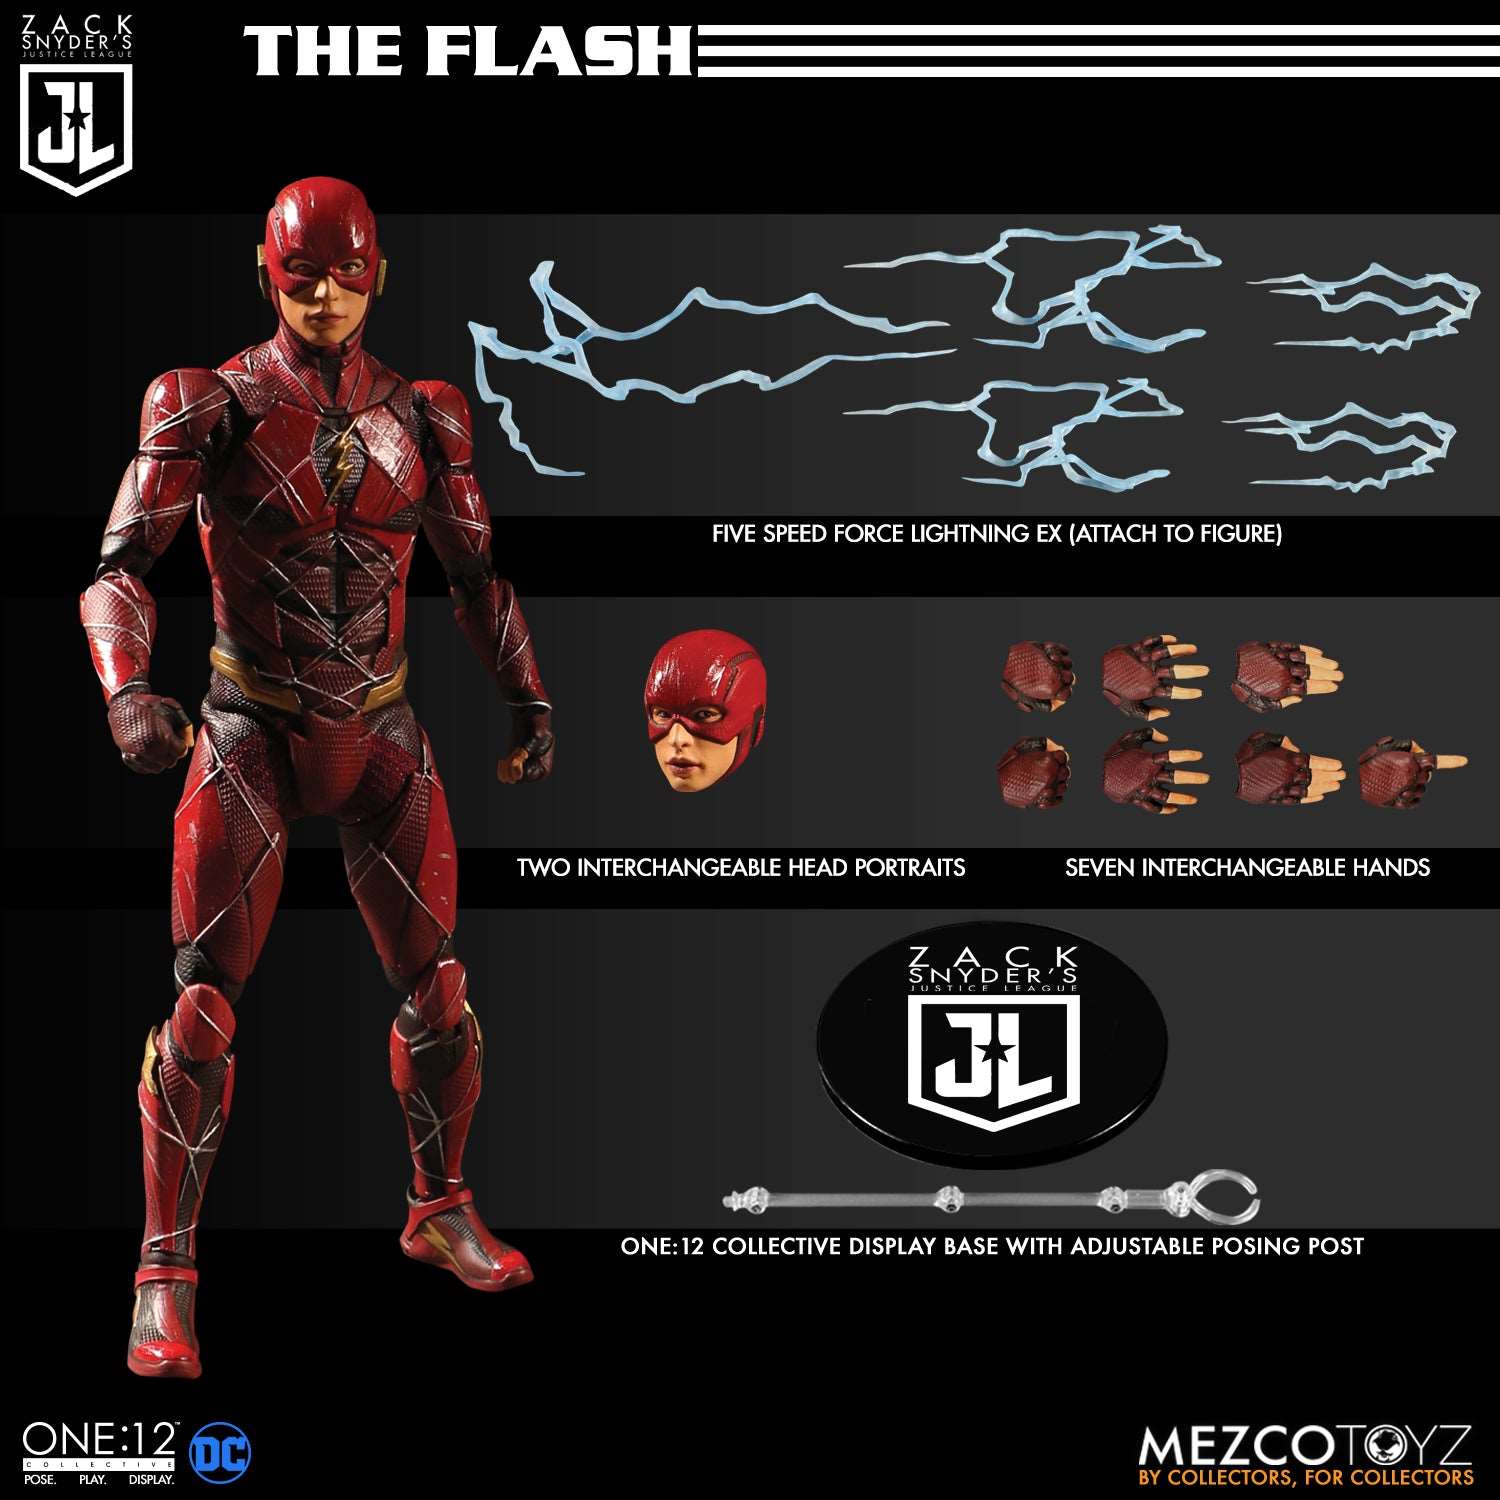 Mezco One Twelfth Collective Zack Snyder’s Justice League Deluxe Steel Boxed Set The Flash figure and accessories